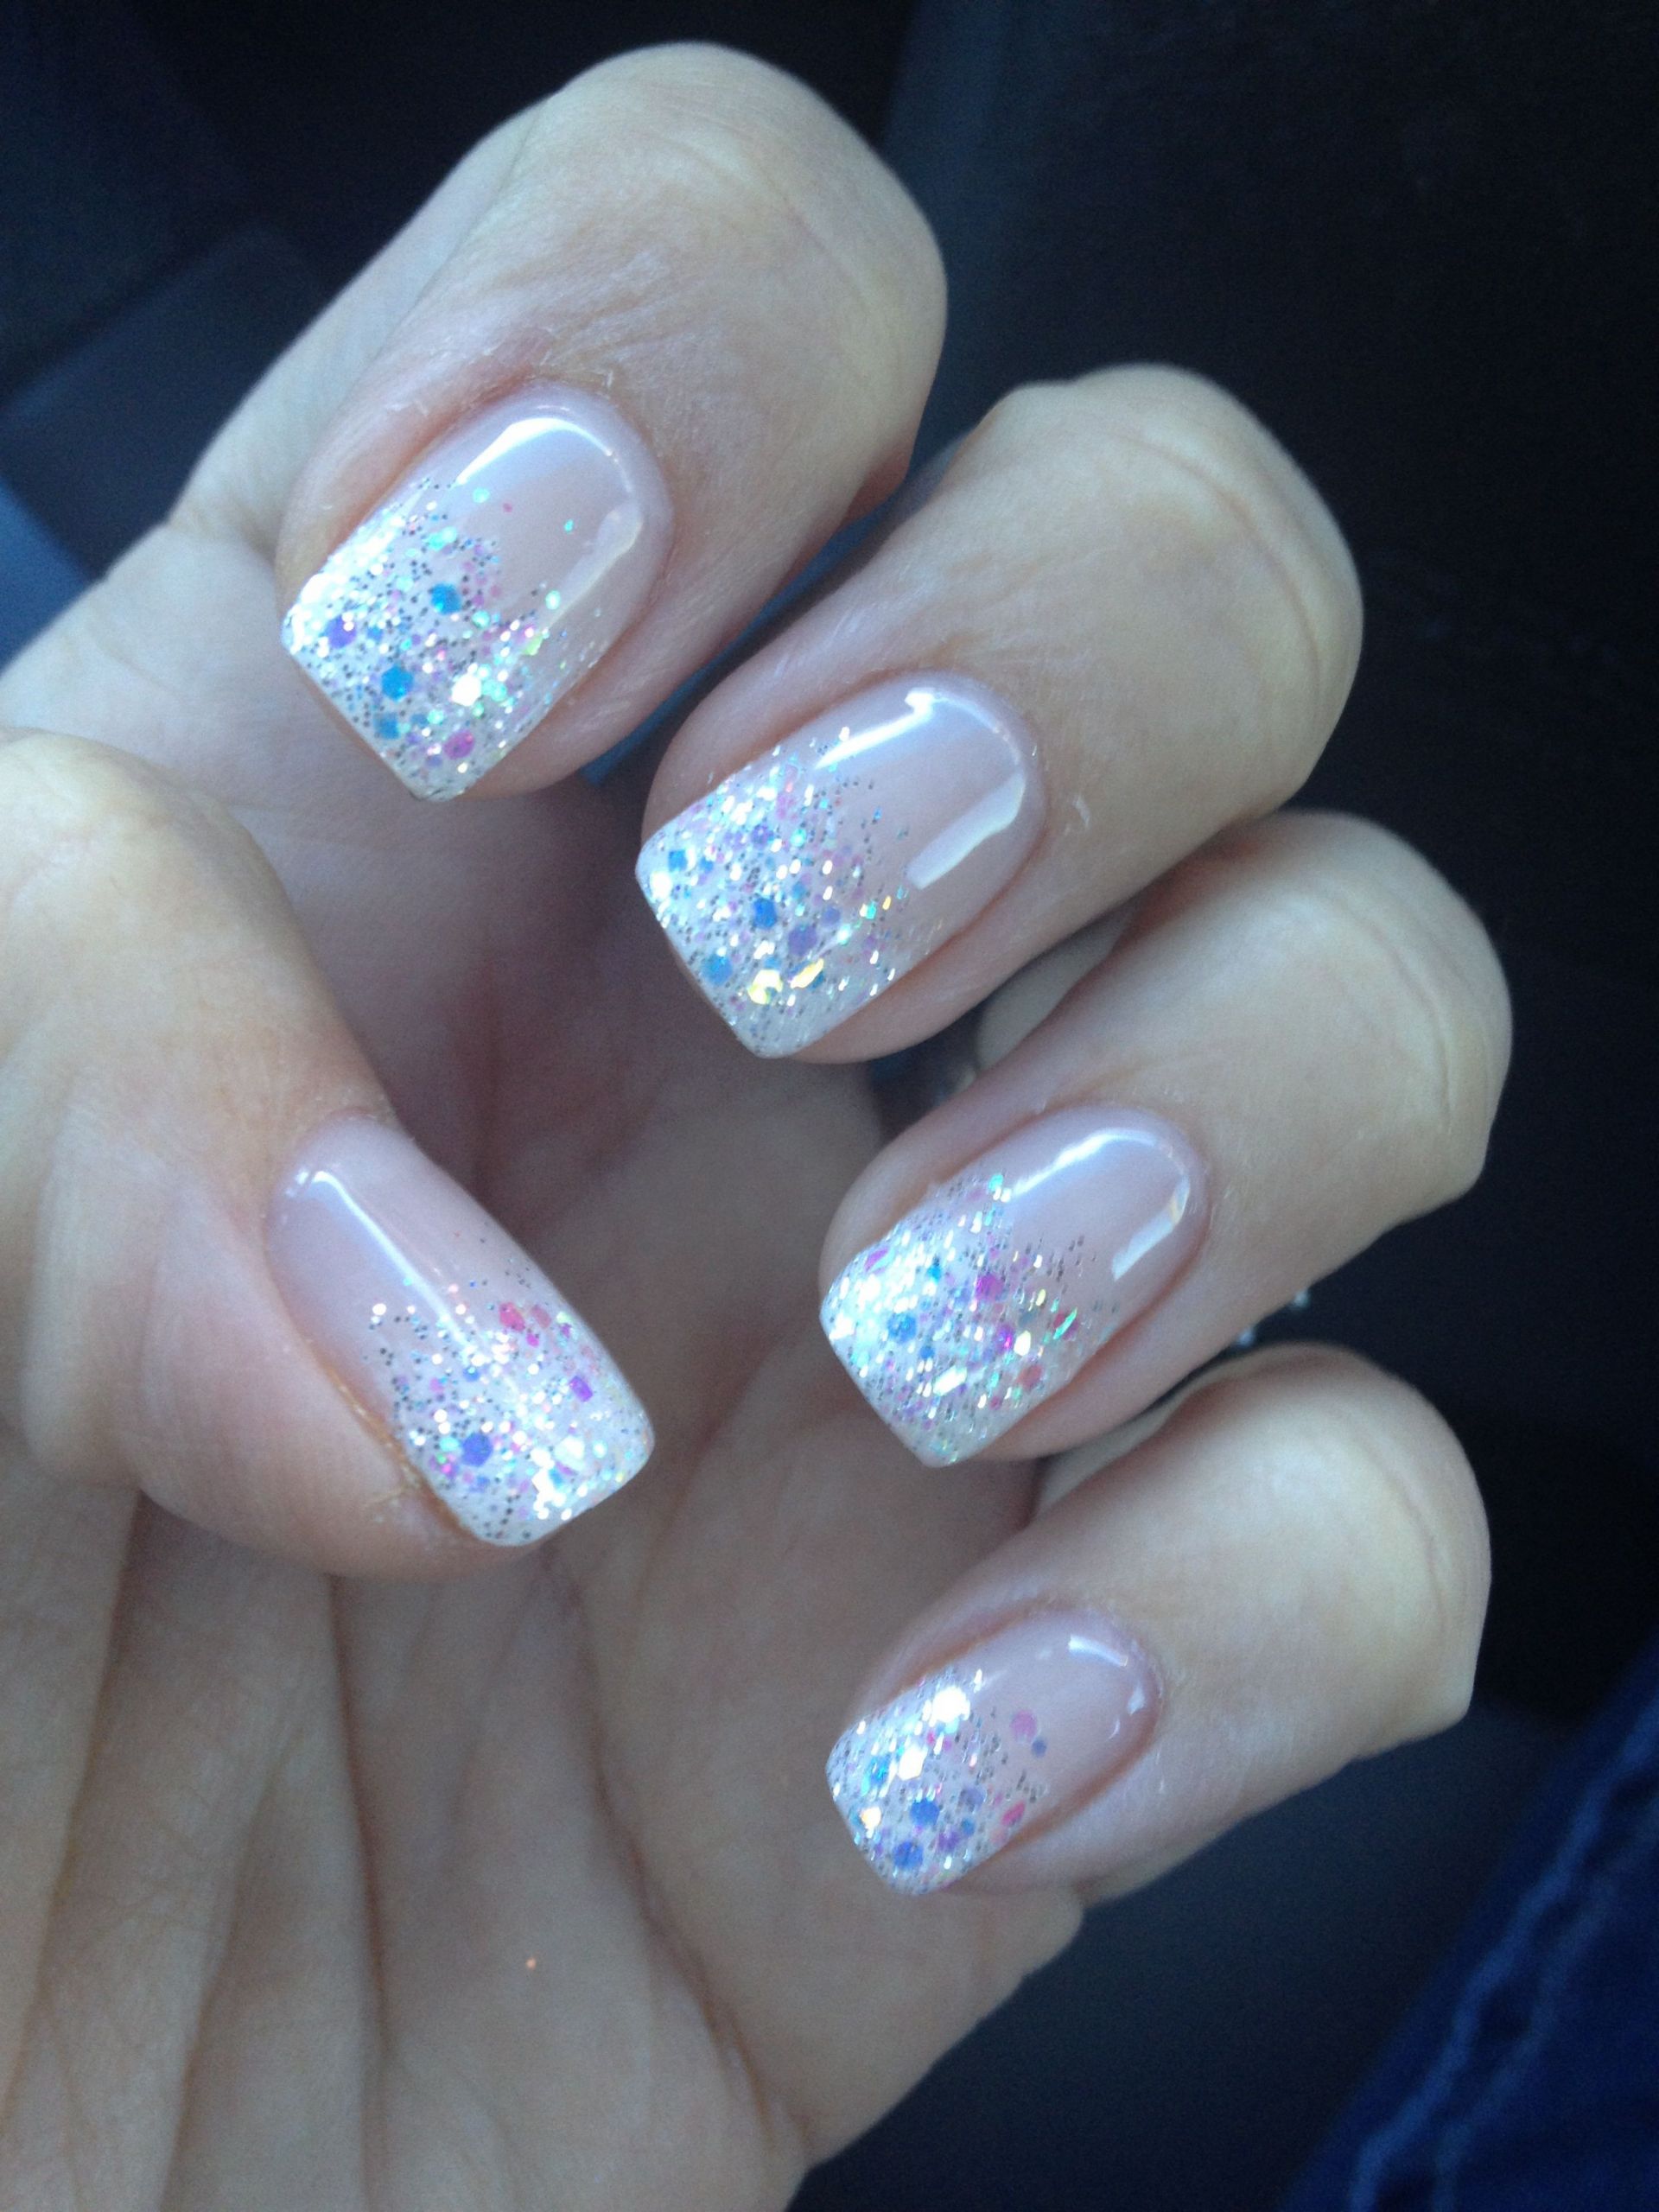 Glitter French Tip Nails
 The perfect glitter french fade mani